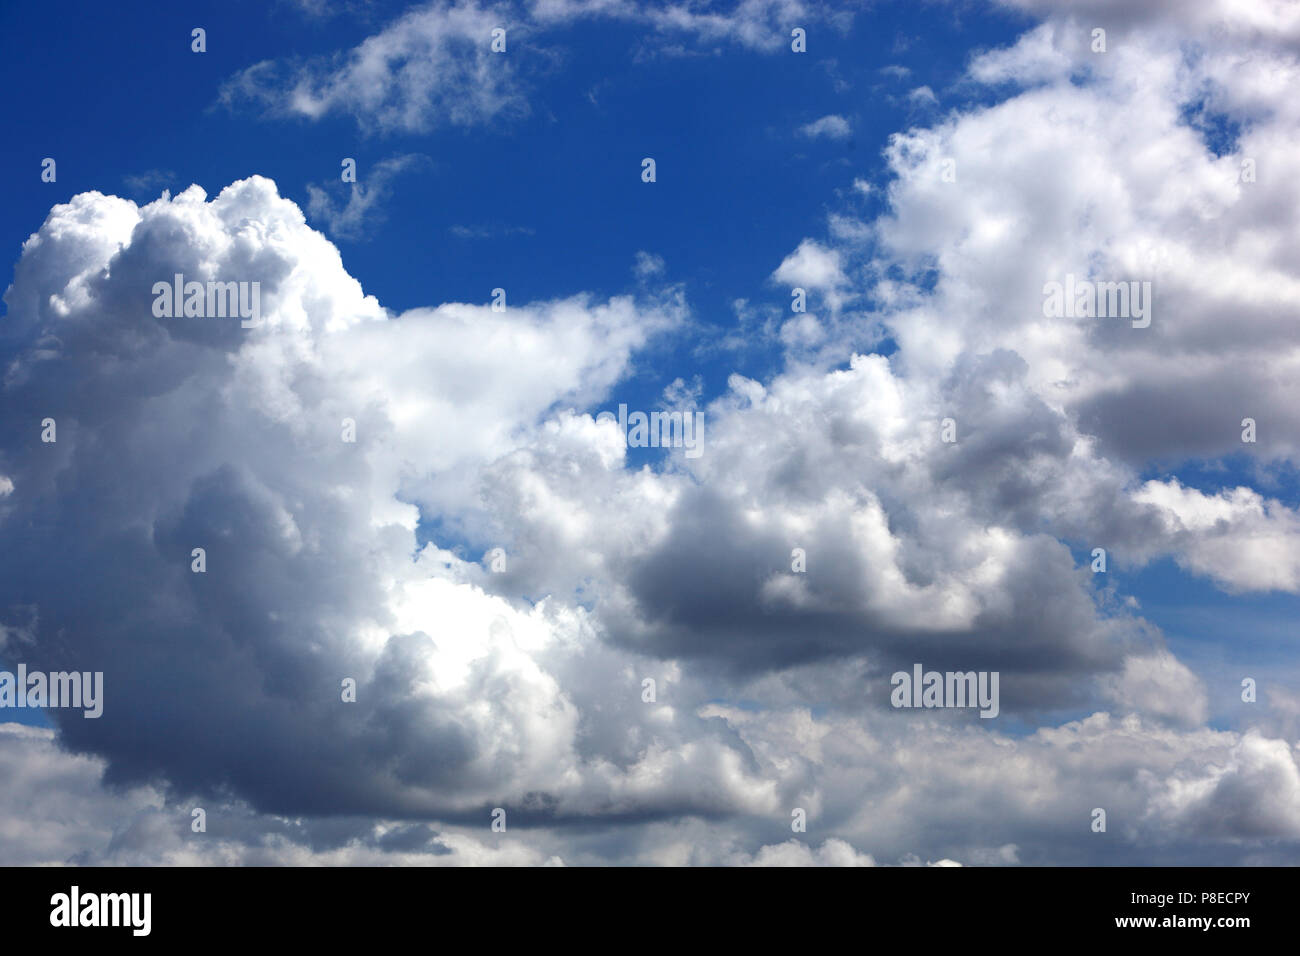 clouds in the sky, rain clouds, low pressure area Stock Photo